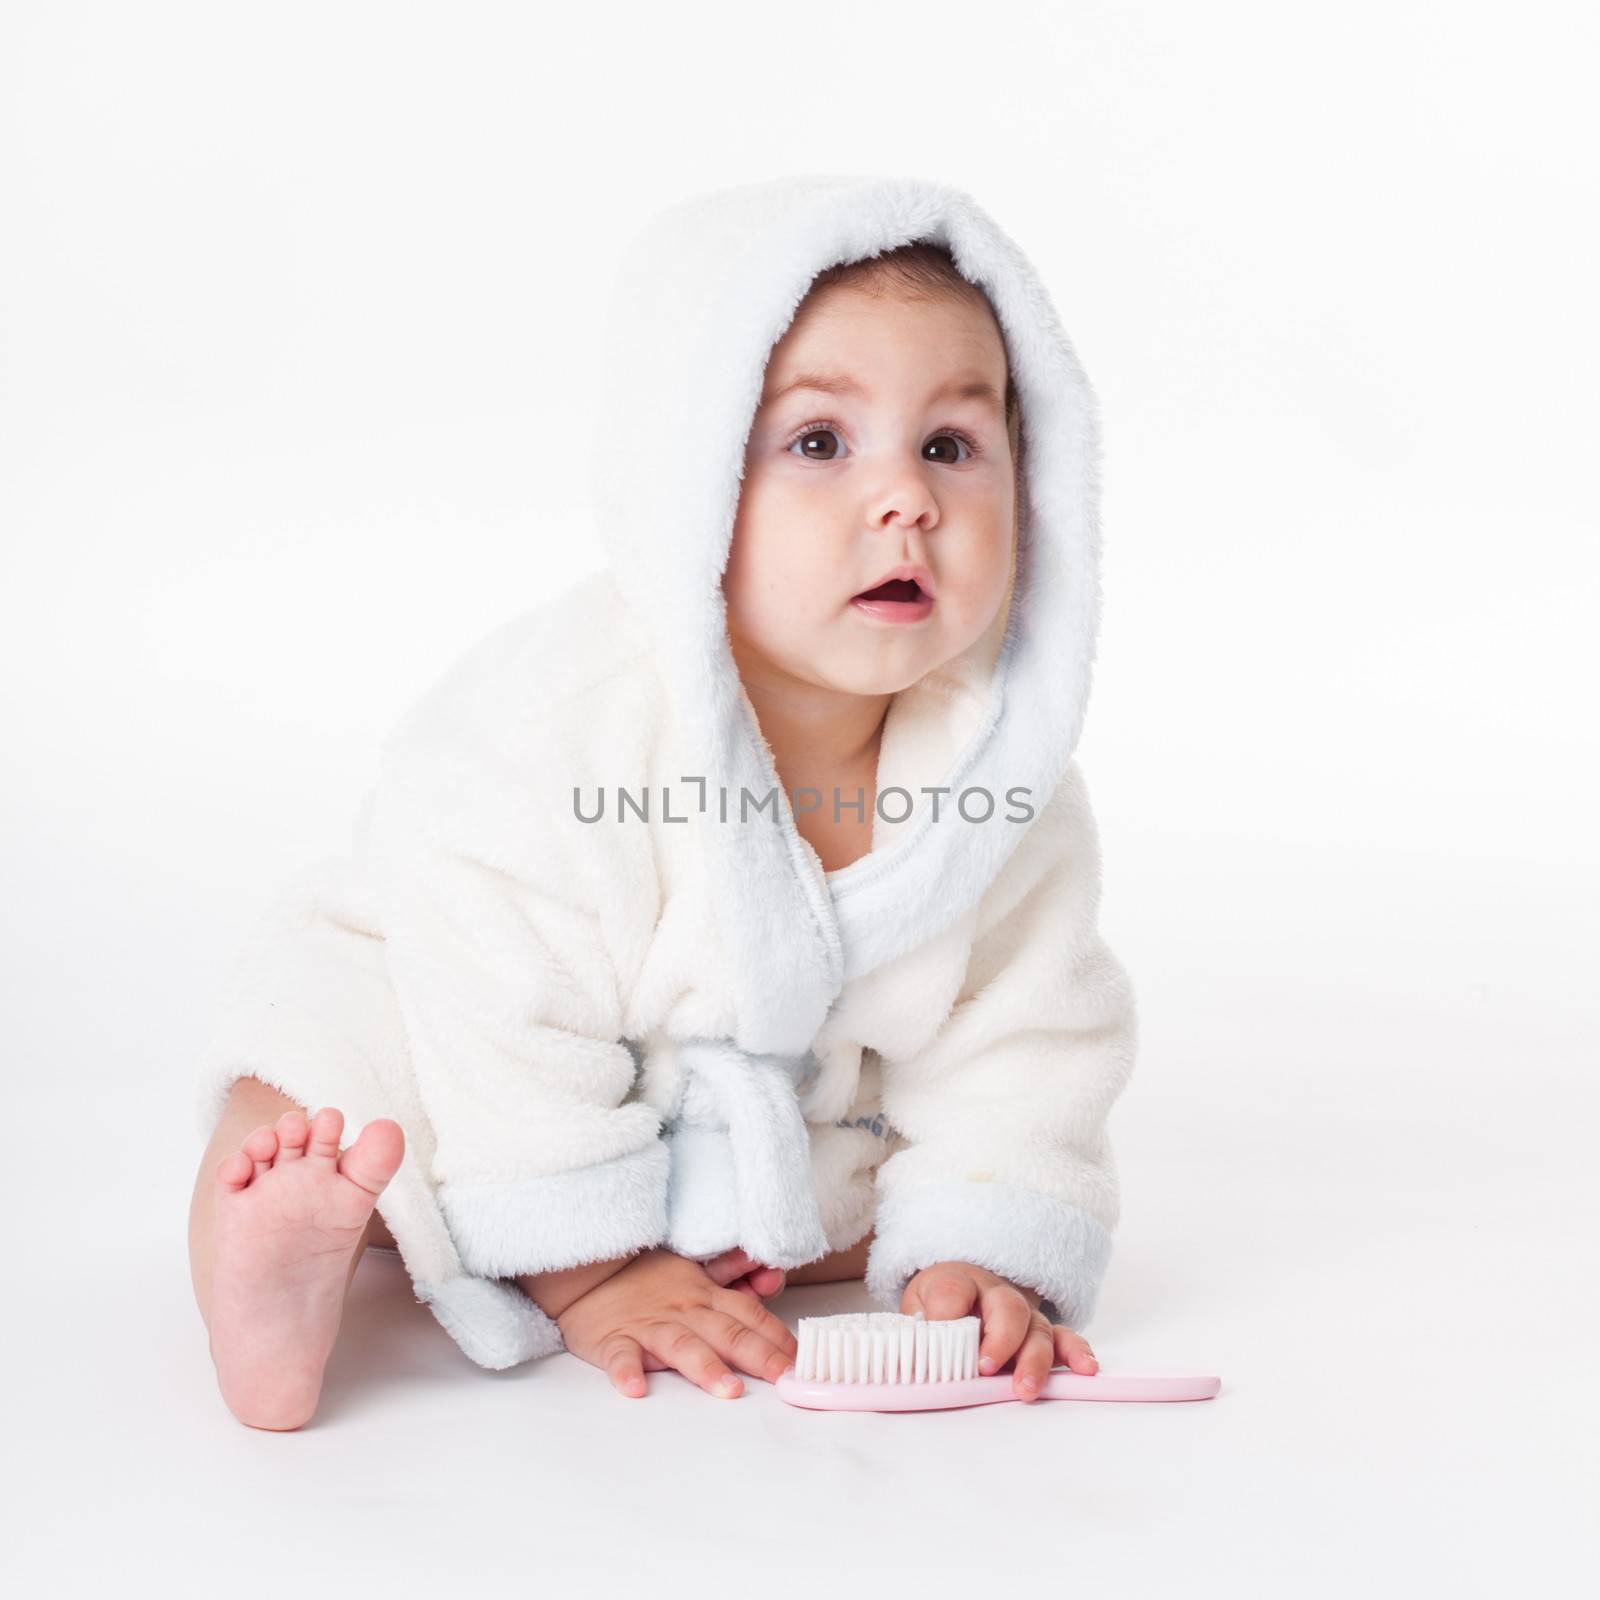 Baby in a bathrobe after bath with comb